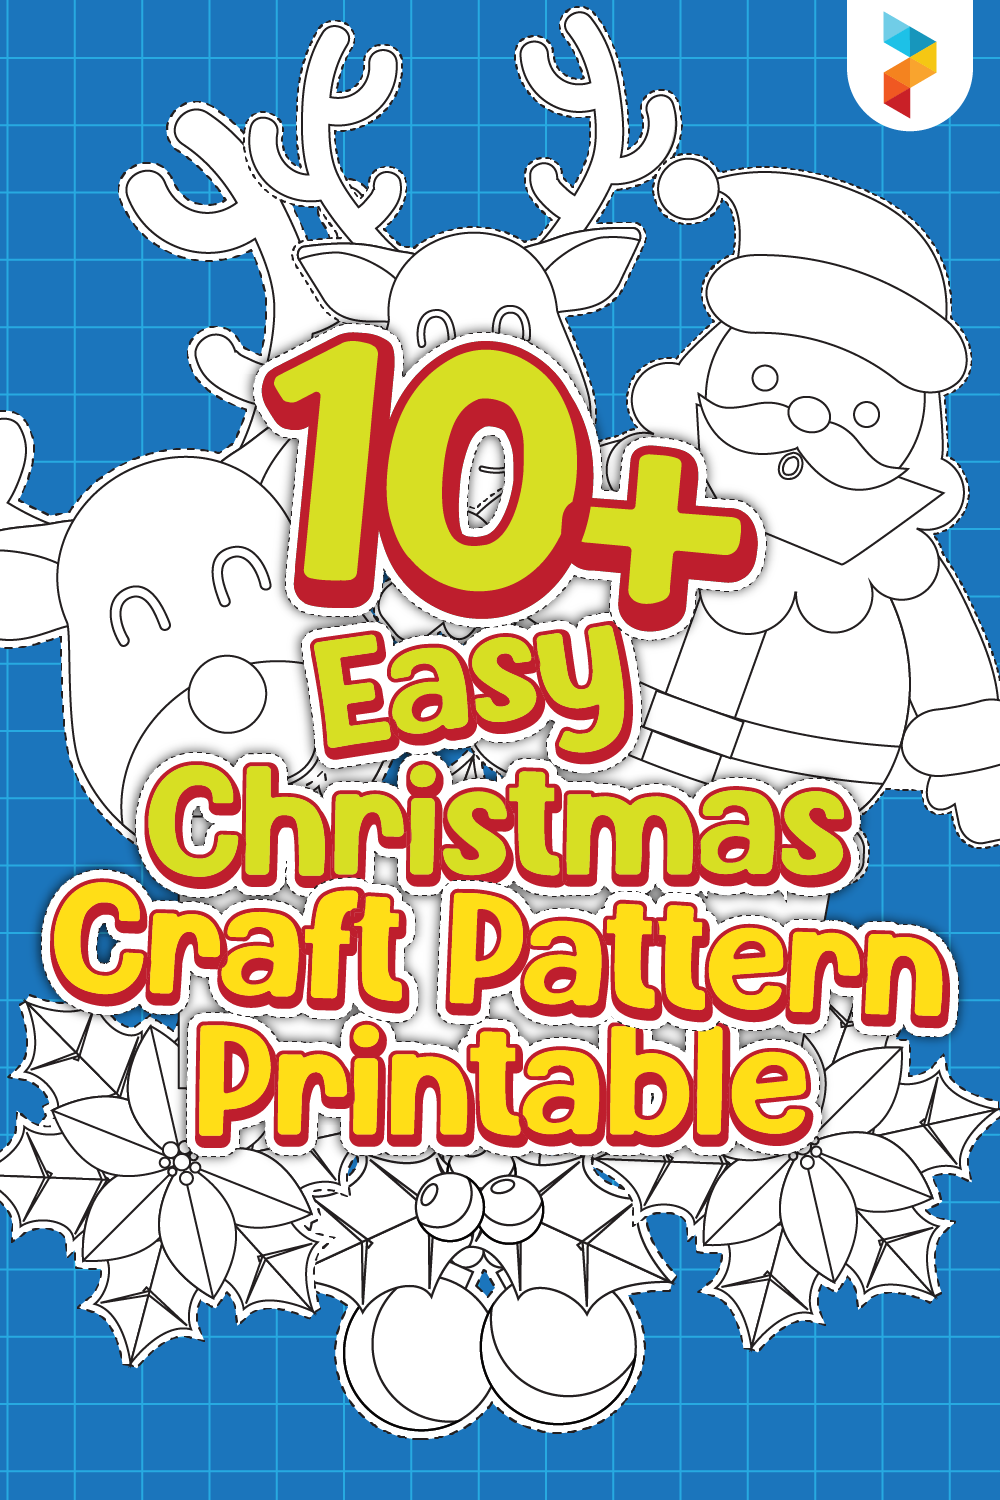 Easy Christmas Craft Patterns